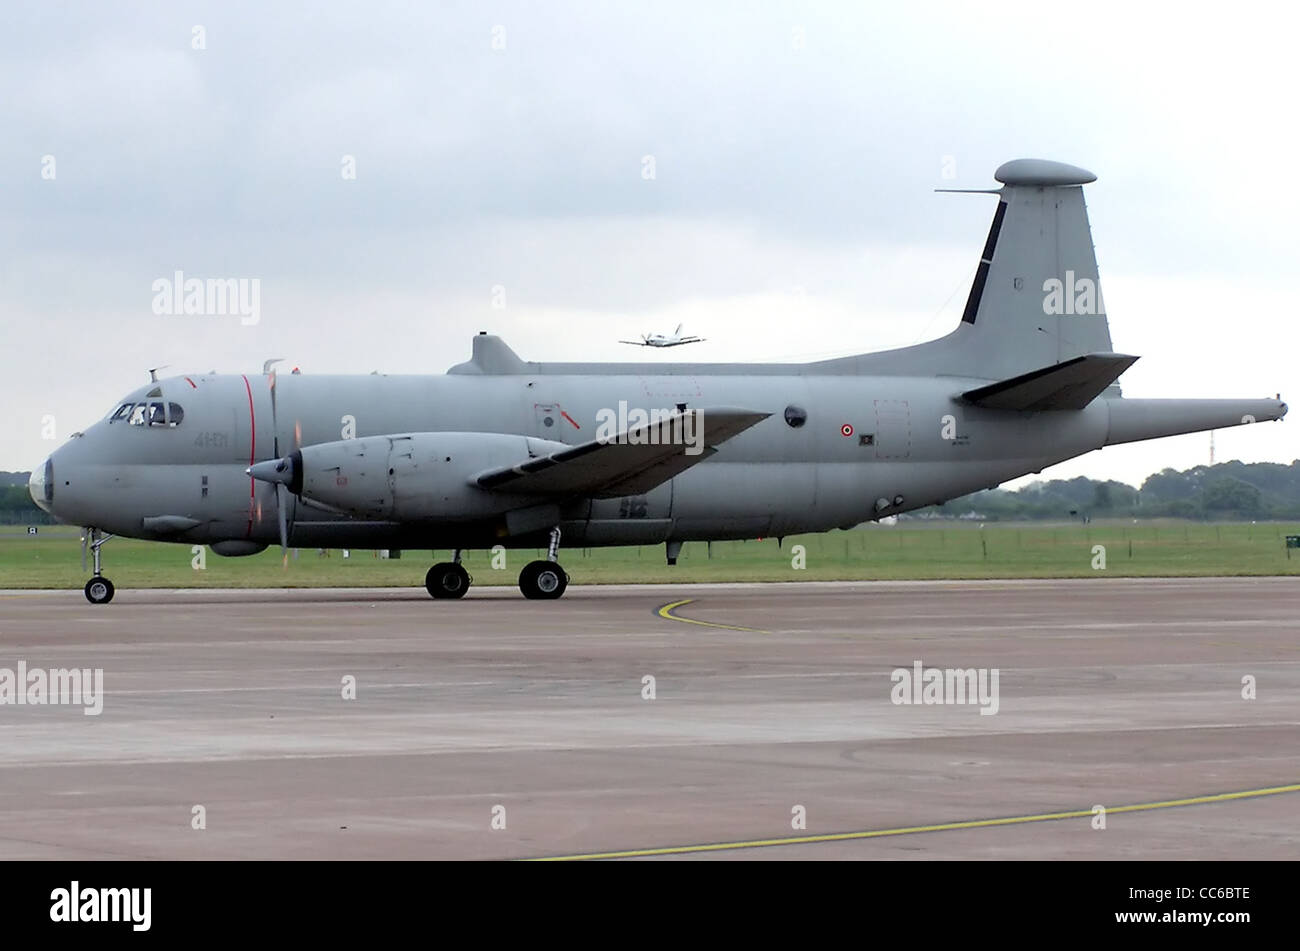 Breguet Br.1150 Atlantic of the Italian Air Force, registration MM 40116, taxying at the Royal International Air Tattoo, Fairfor Stock Photo